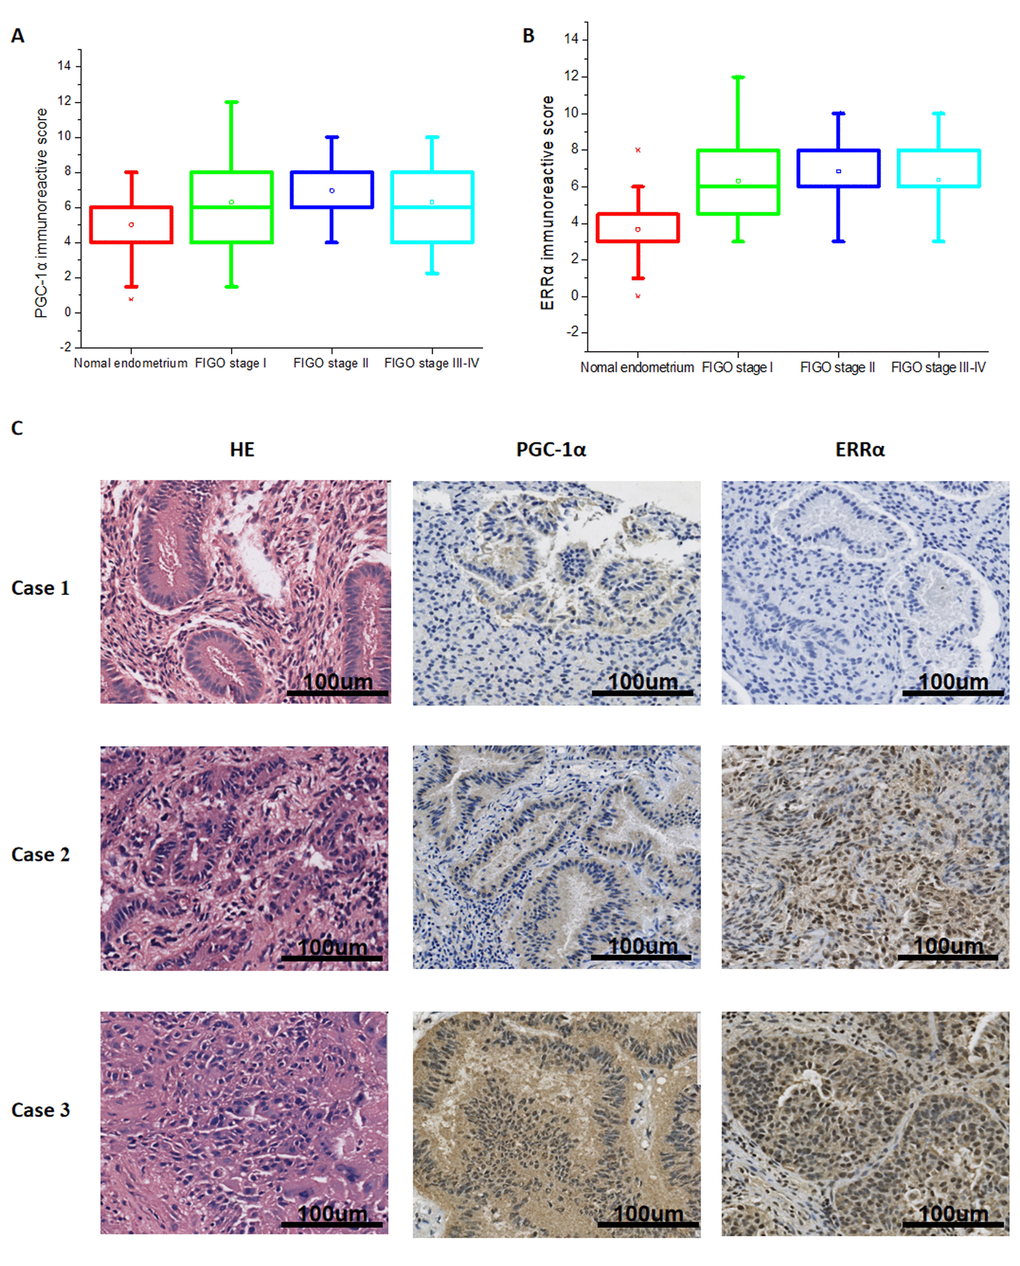 Expression of PGC-1α and ERRα in normal endometrium and endometrial cancer tissue. Expression of PGC-1α (A) and ERRα (B) in normal endometrium and different clinical stage endometrial cancer. (C) HE staining and immunohistochemical staining of PGC-1α, ERRα in normal endometrium (Case 1), superficial myometrial invasion EC (Case 2) and deep myometrial invasion EC (Case 3).